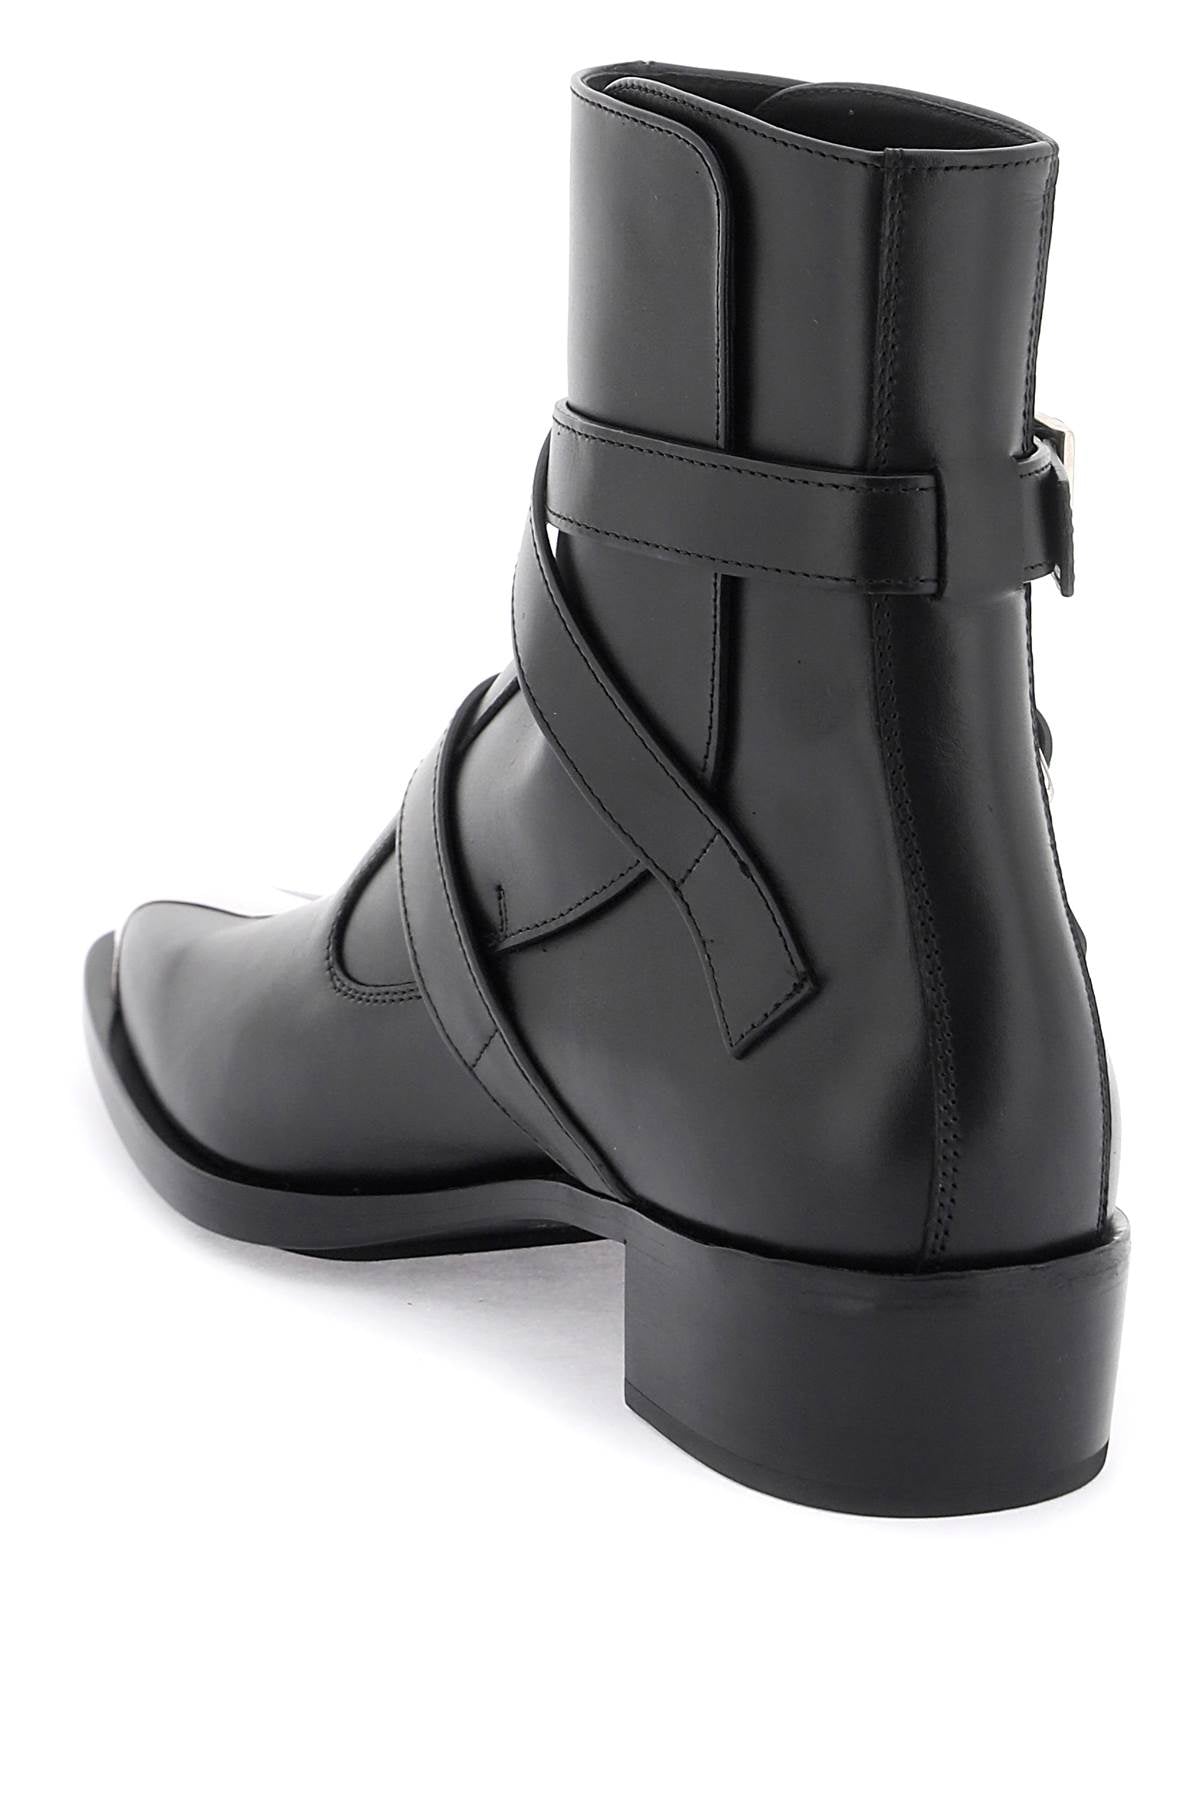 Alexander mcqueen 'punk' boots with three buckles-2